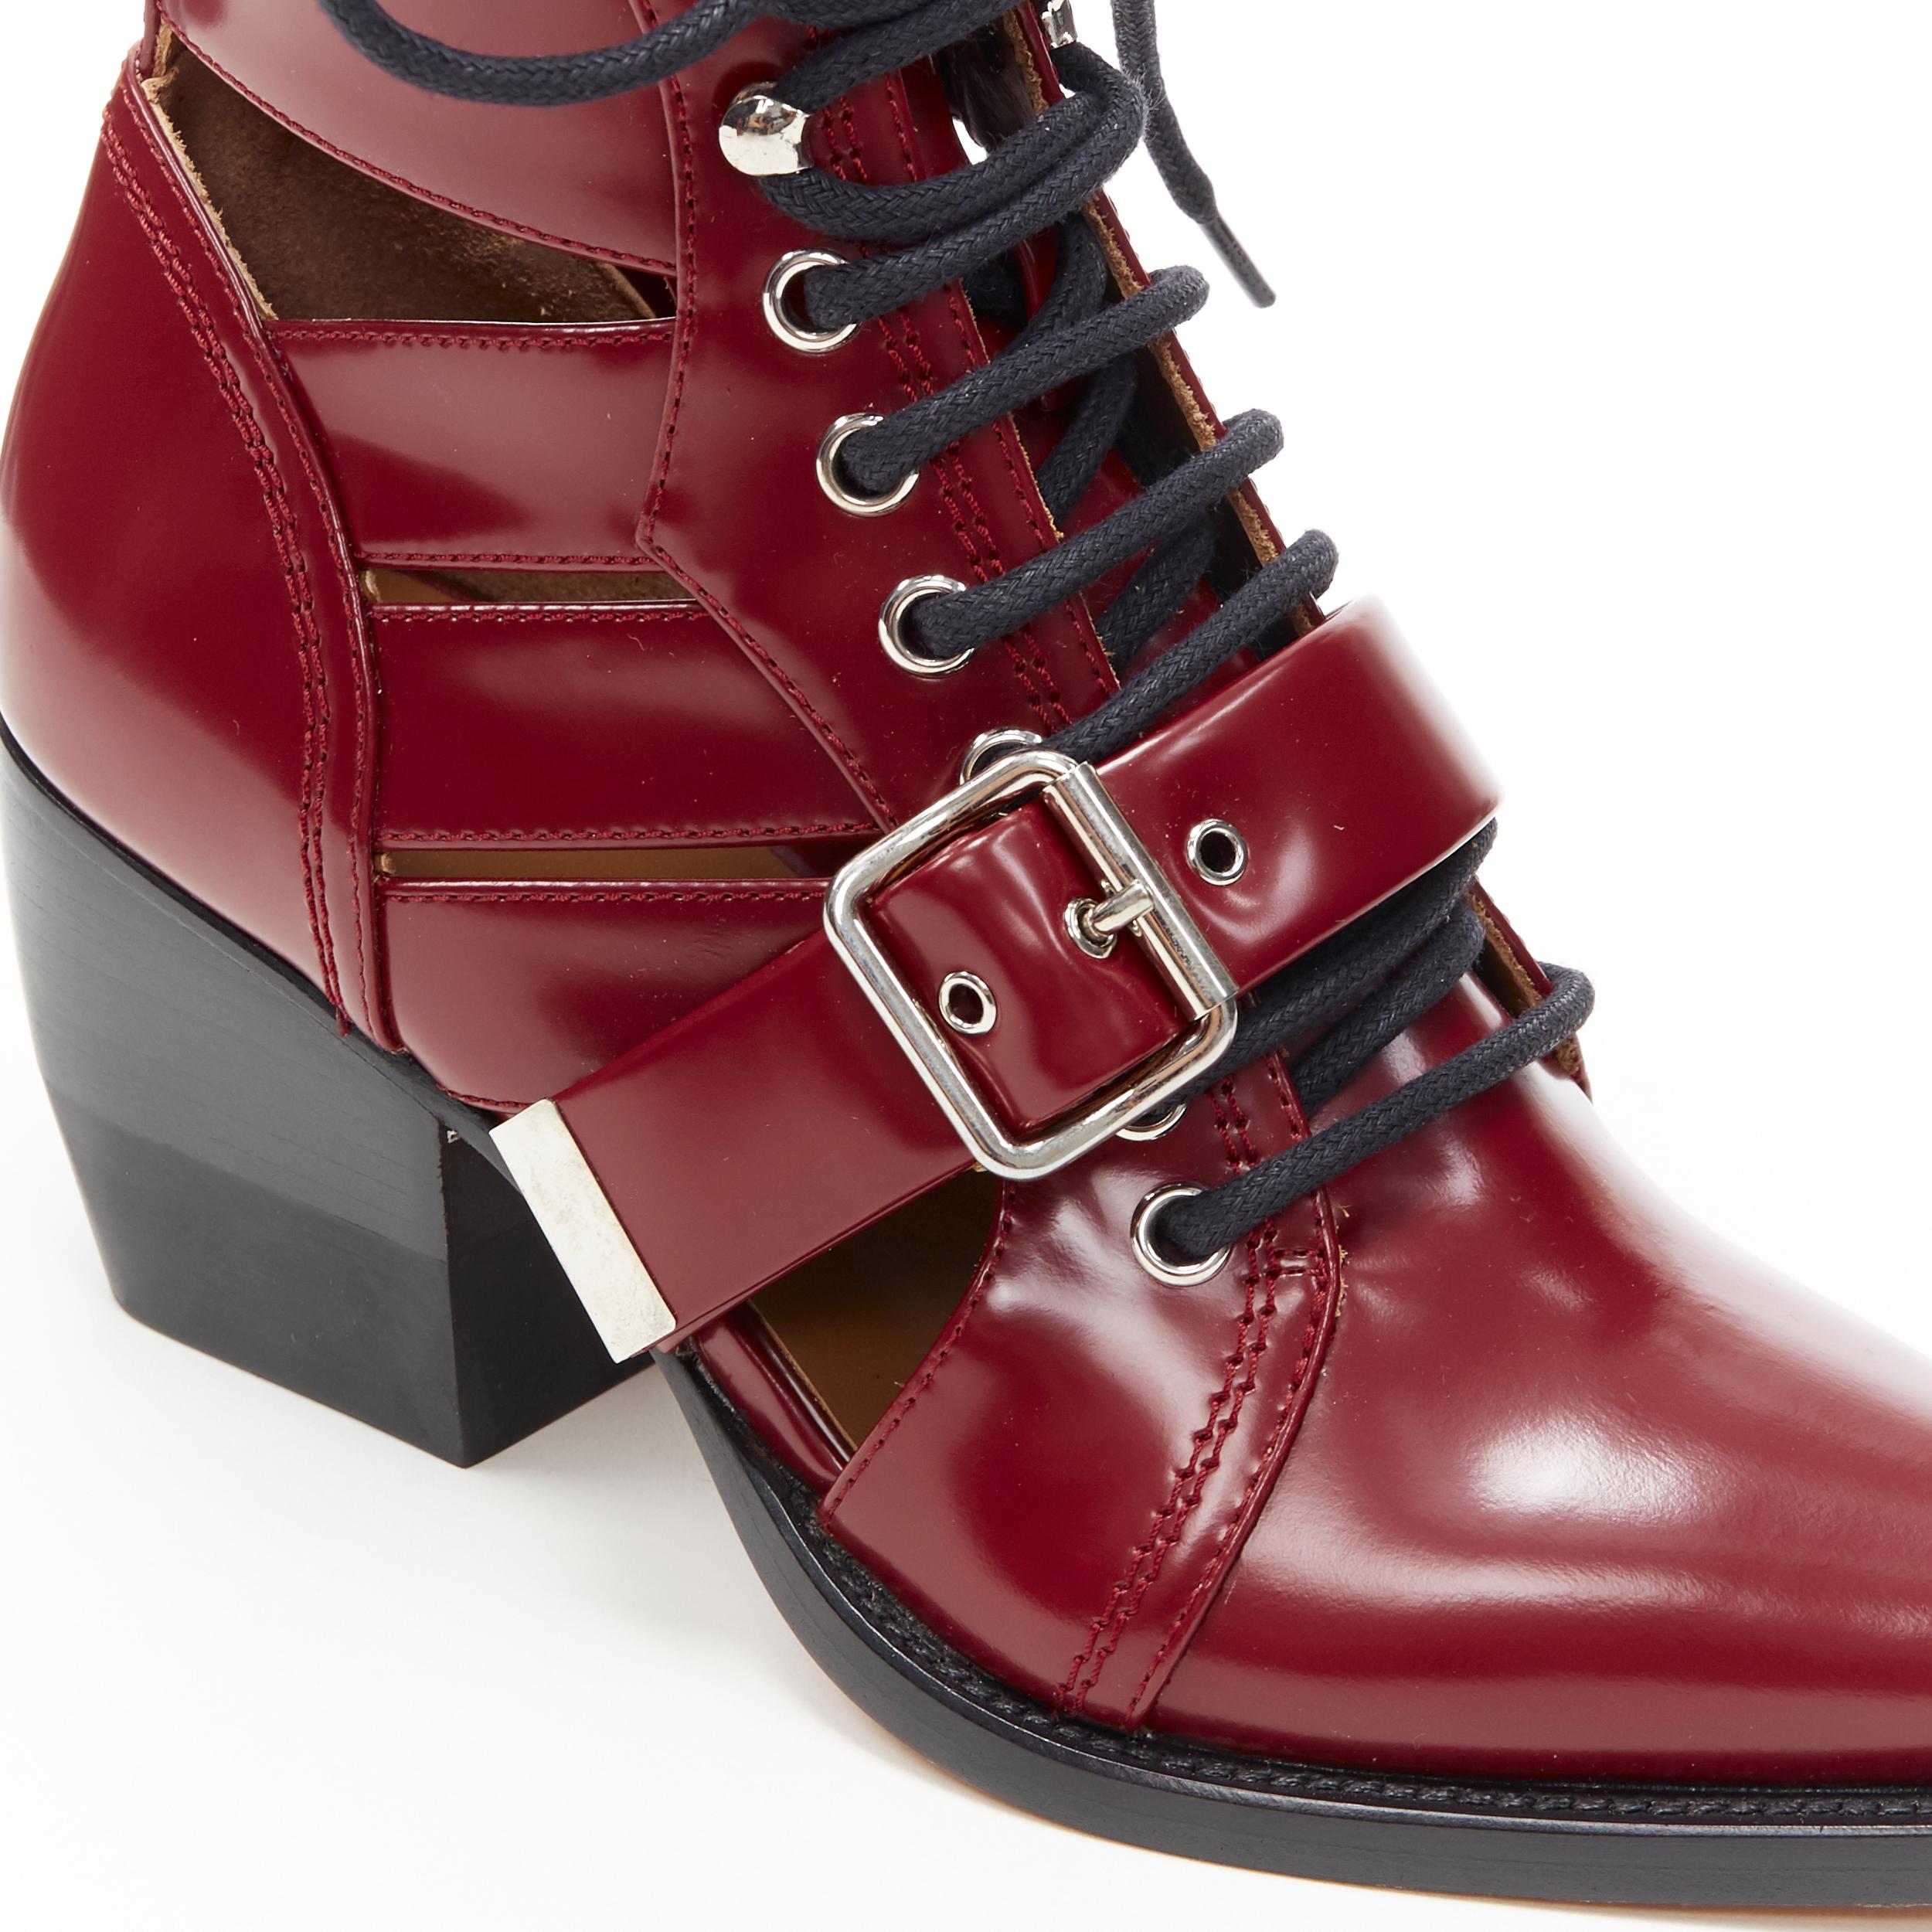 new CHLOE Rylee burgundy red leather cut out buckled pointy ankle boot EU37 3